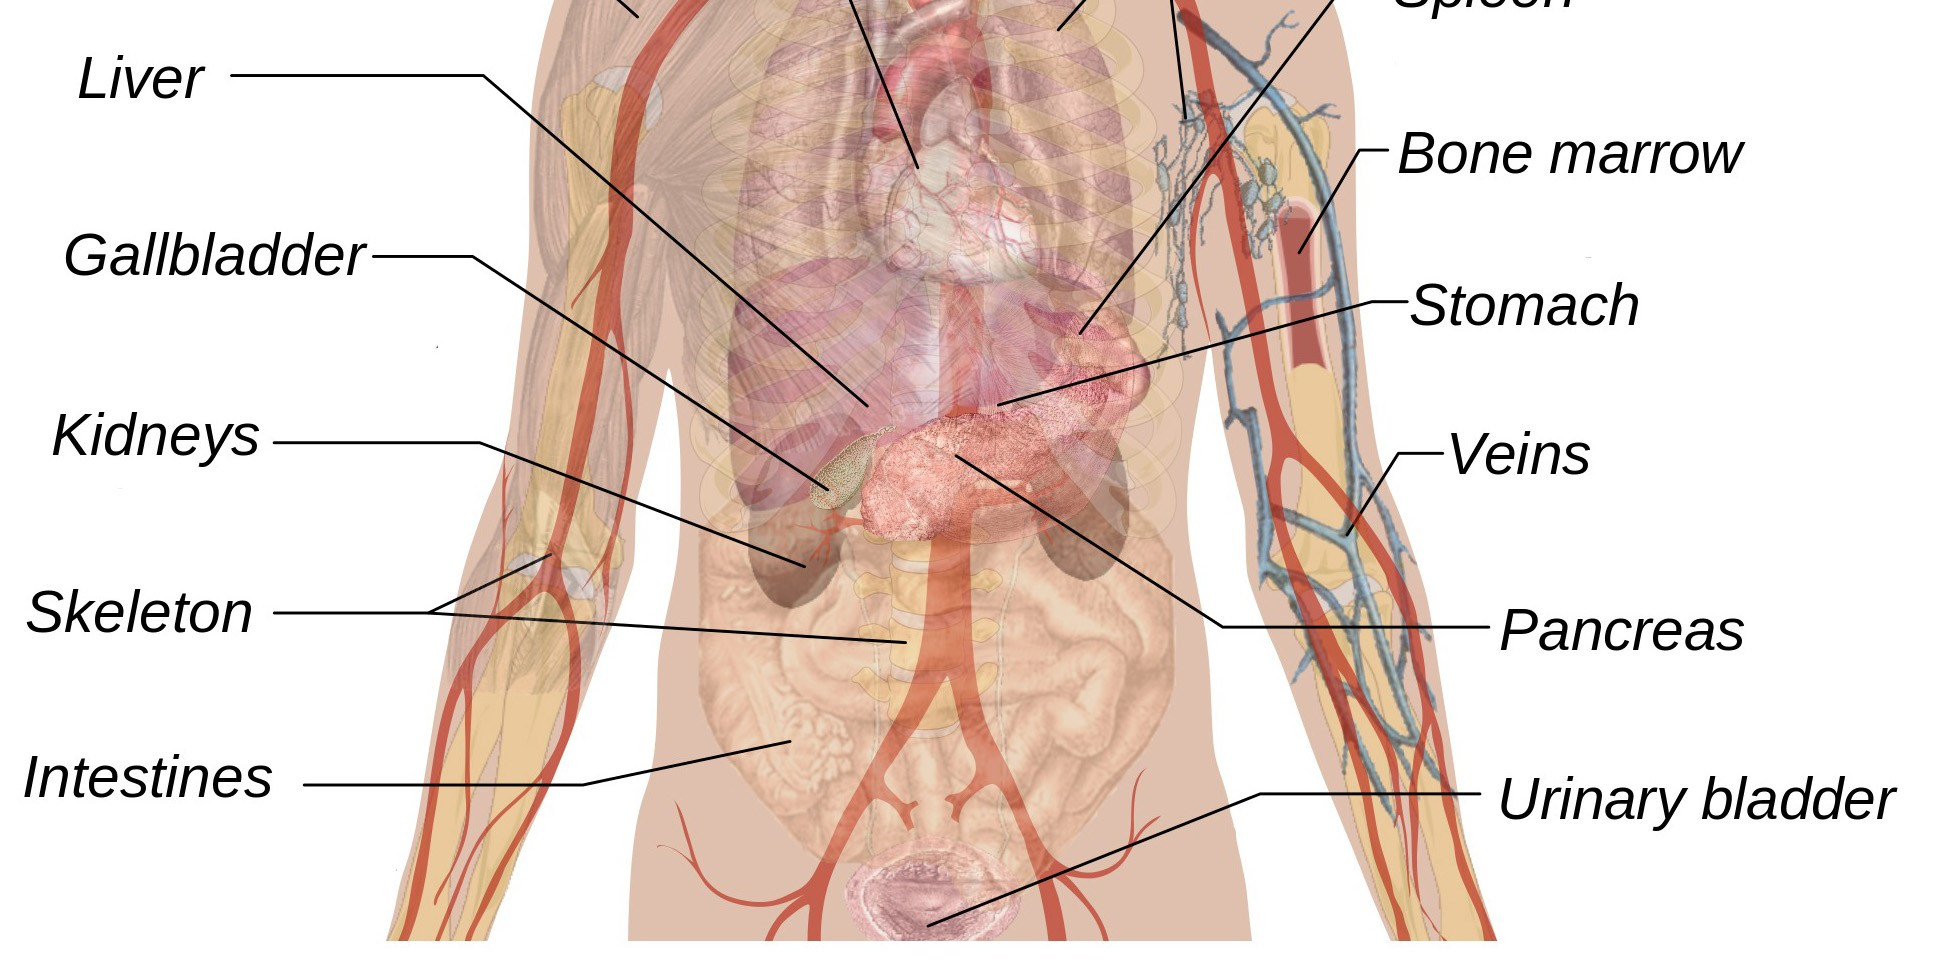 Gallbladder Pain Location Diagram Diagram Of Lower Belly Today Diagram Database